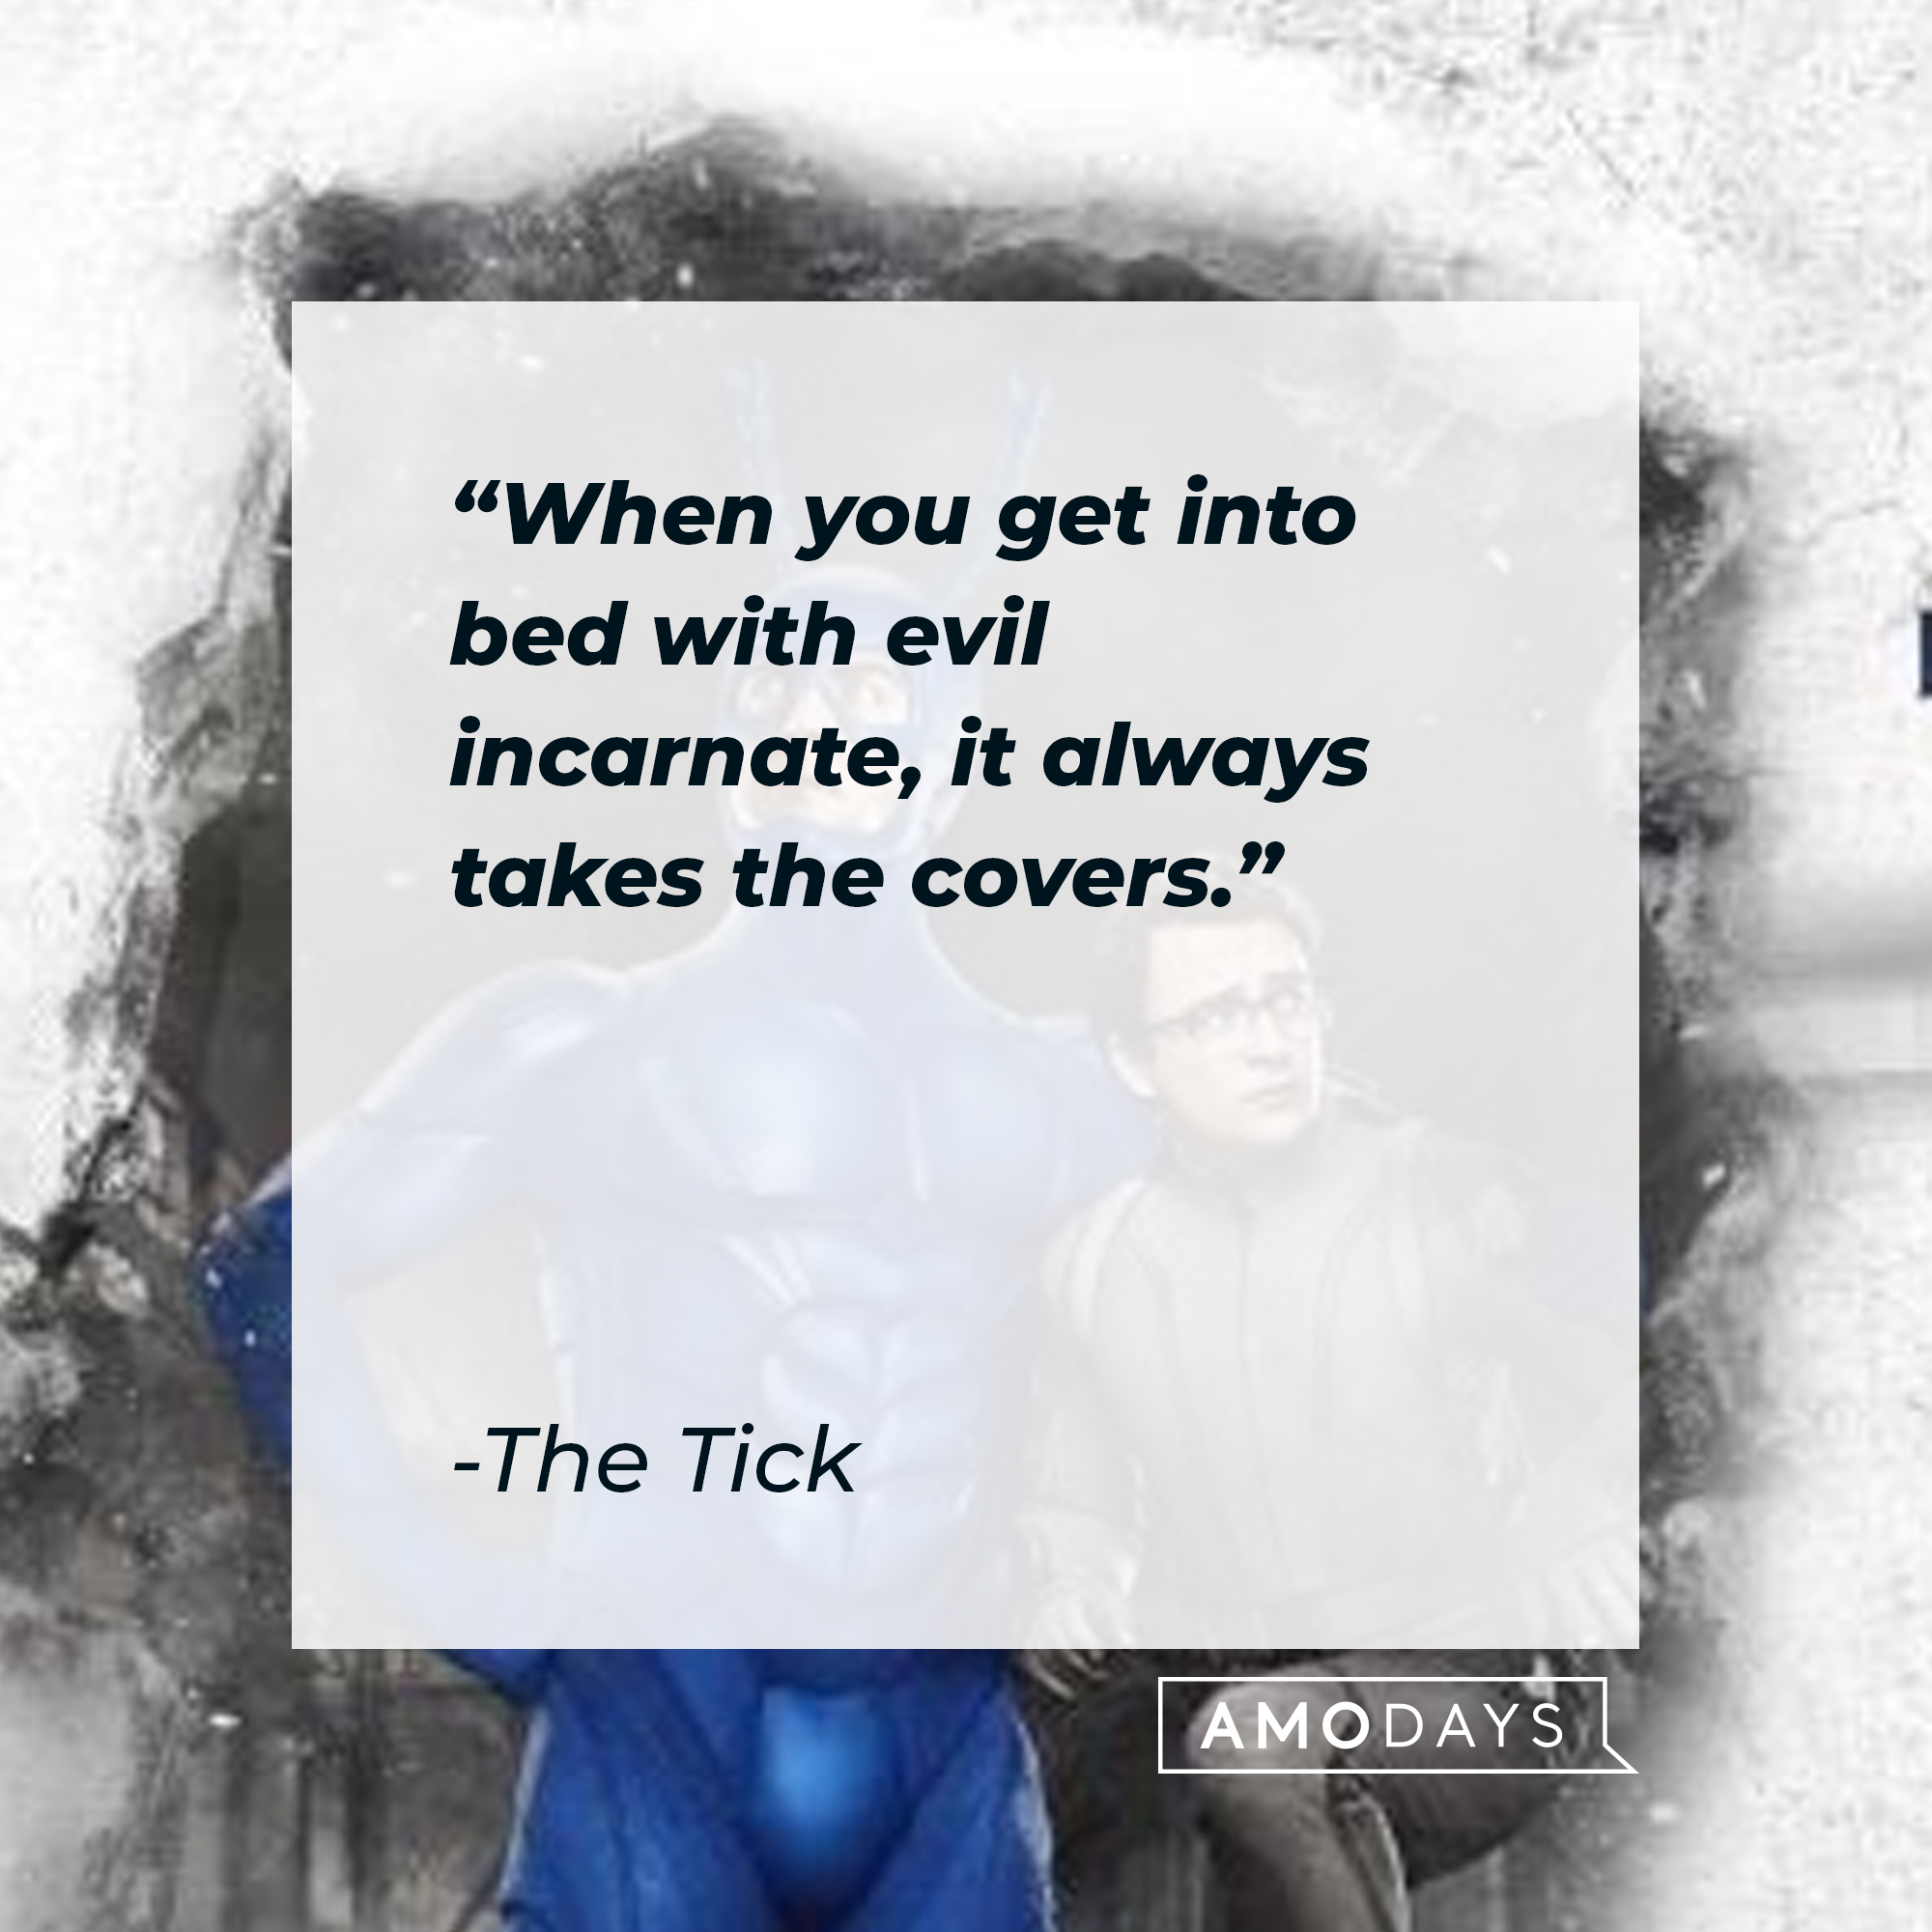 The Tick's quote: "When you get into bed with evil incarnate, it always takes the covers." | Source: Facebook.com/TheTick